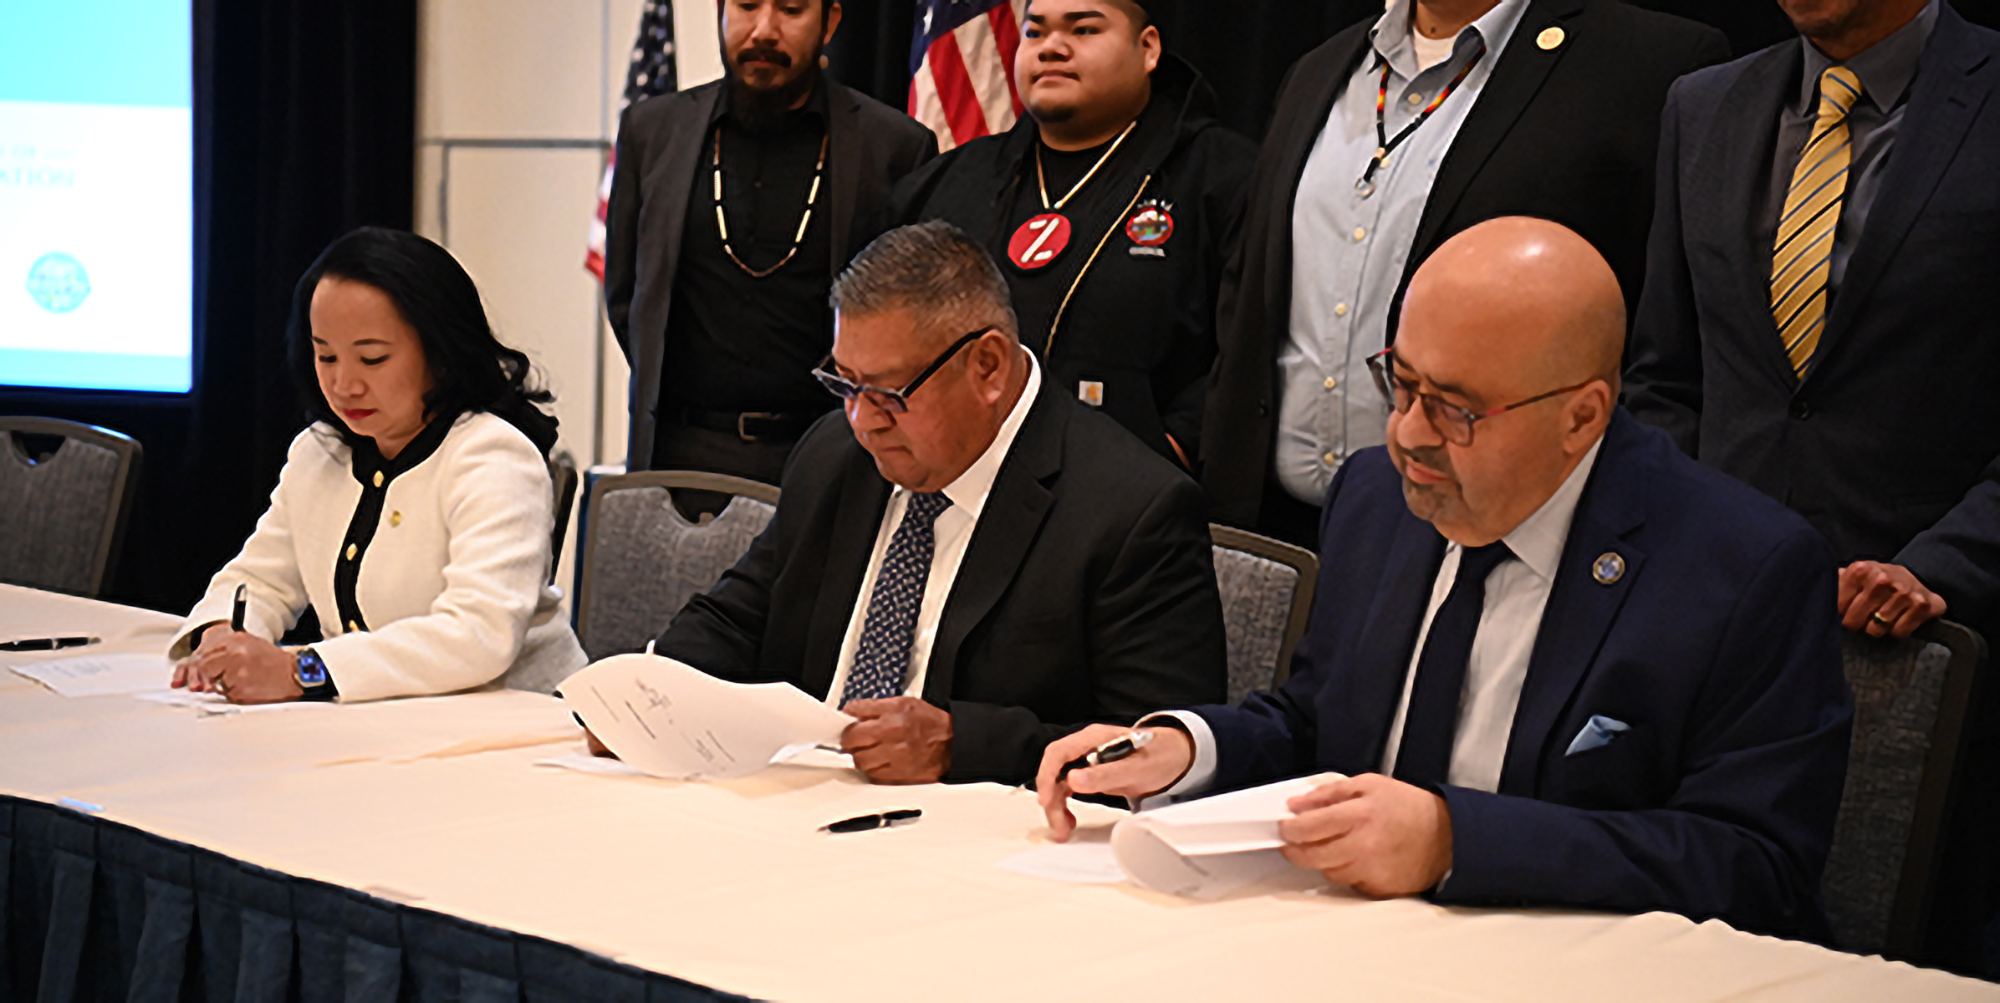 Three people signing agreements with people standing behind them.